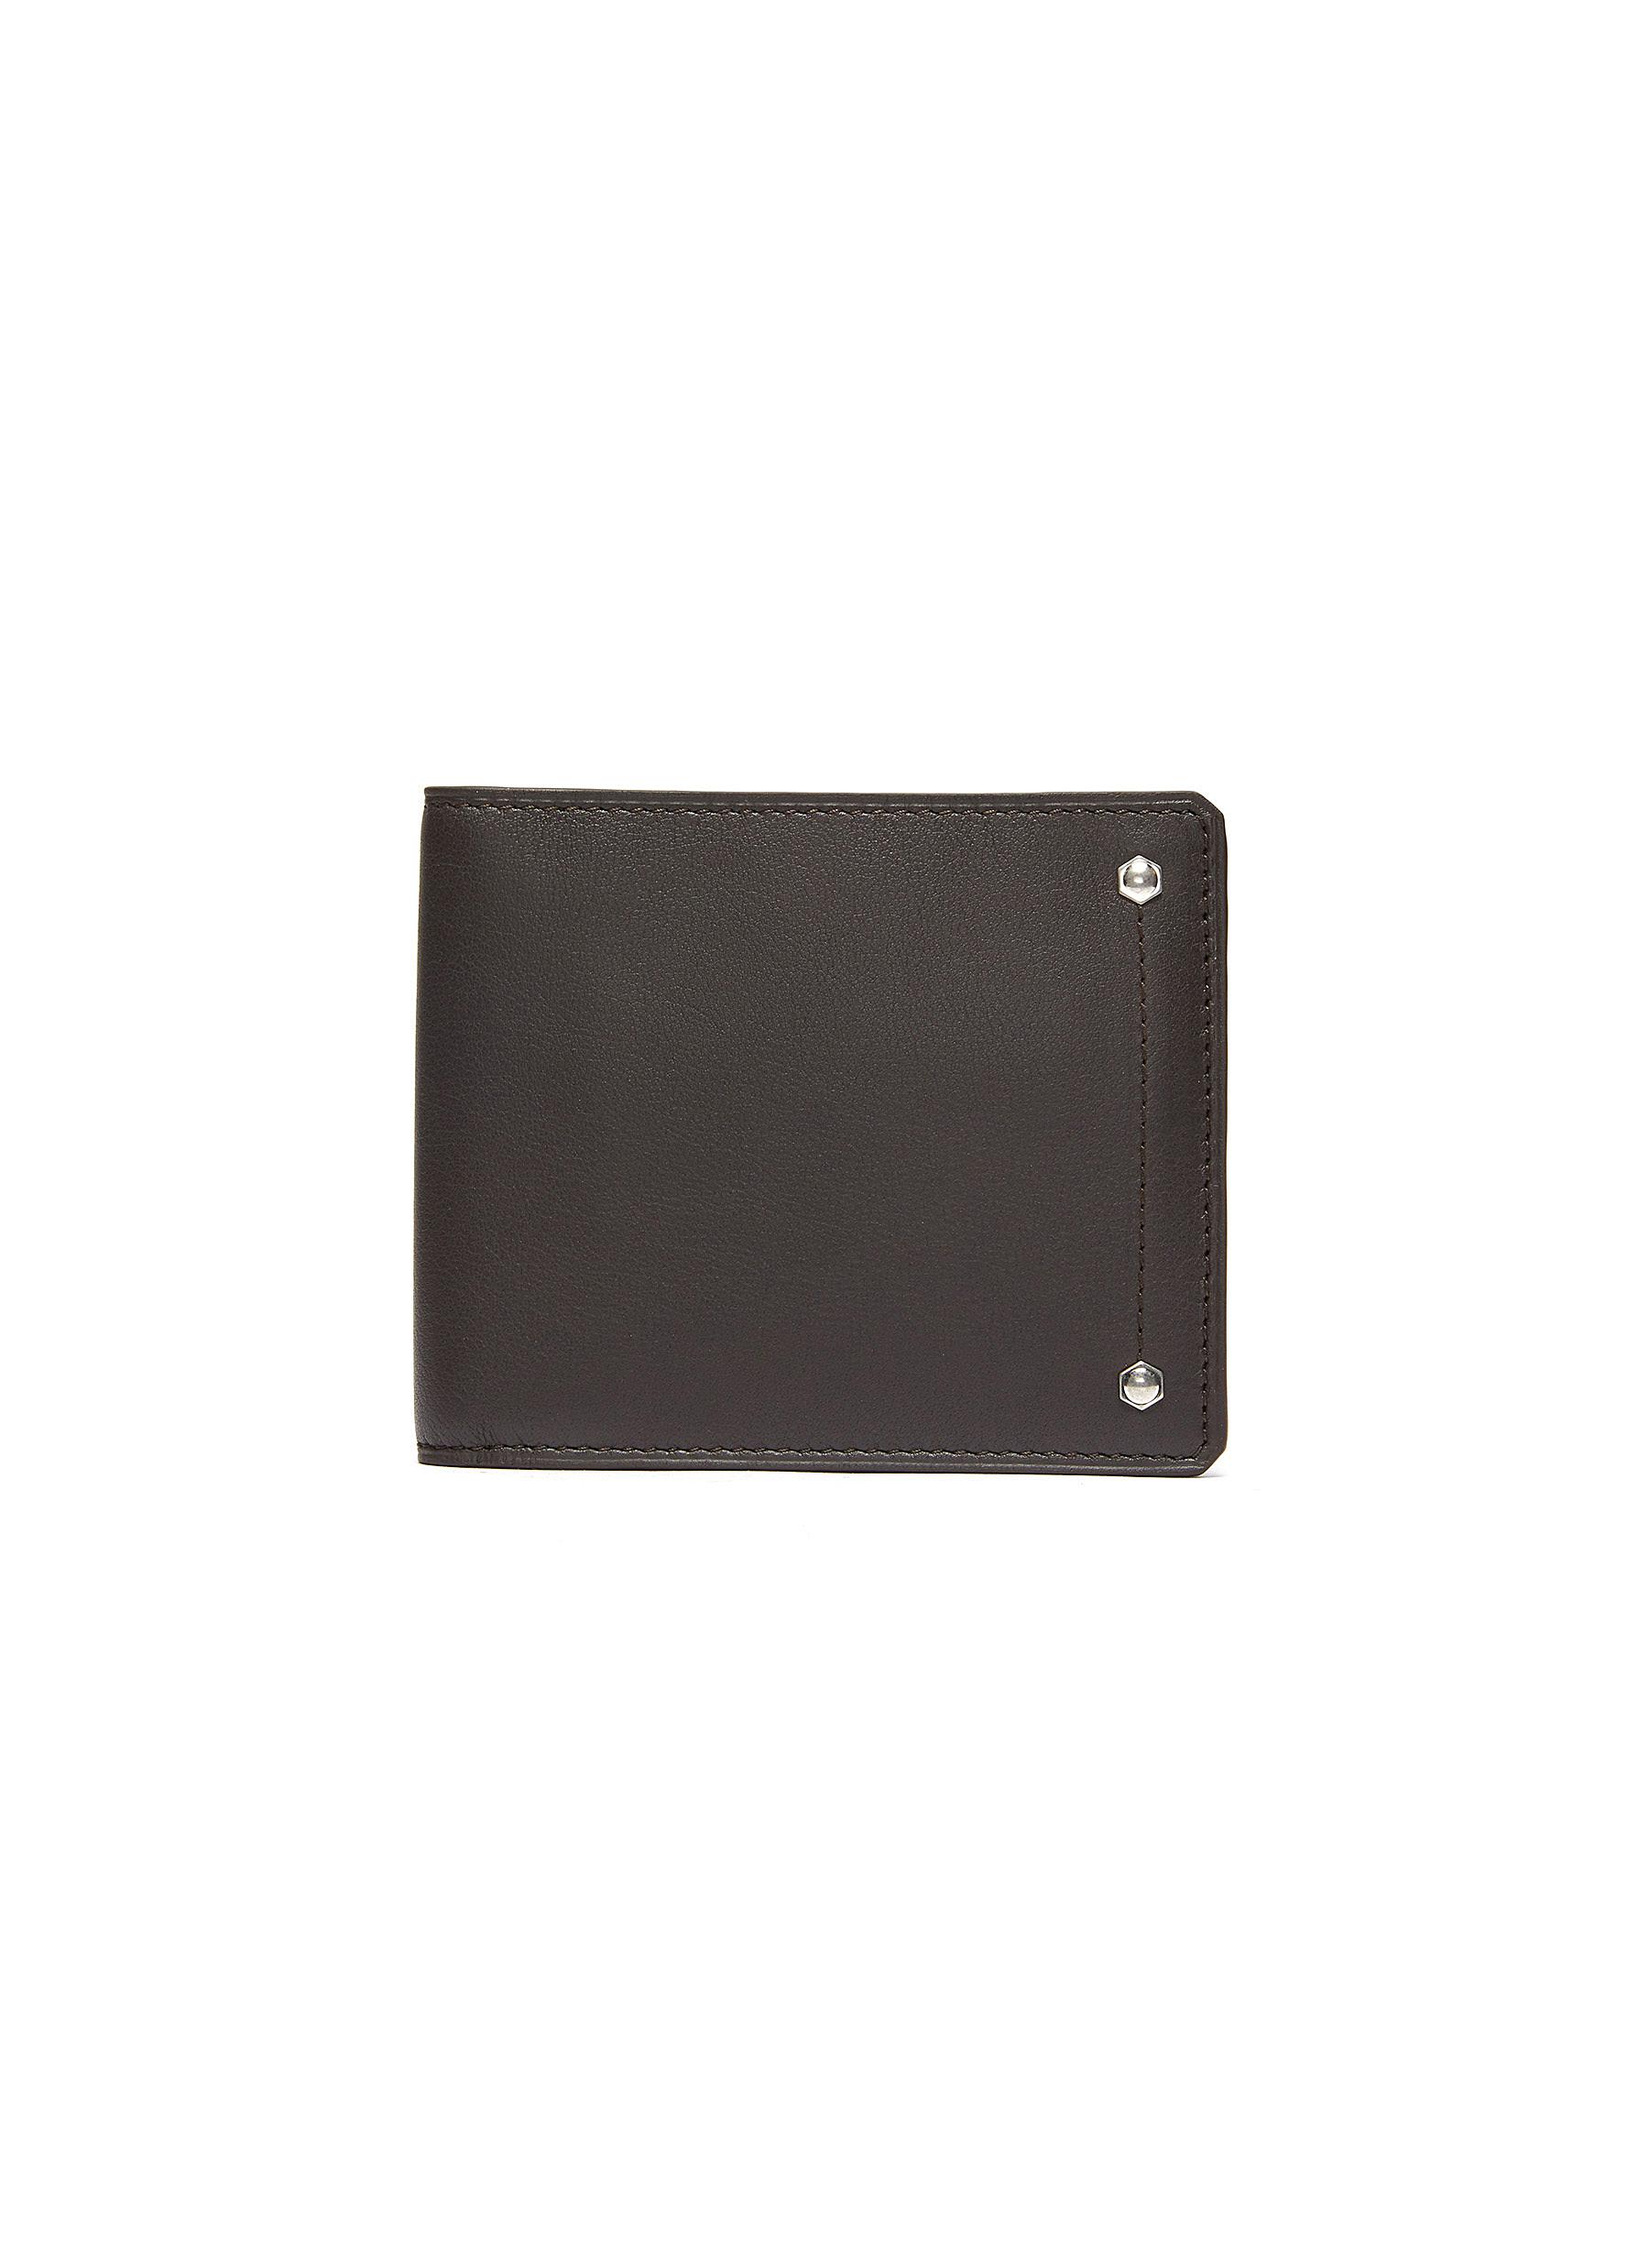 CONNOLLY 'Hex' leather bifold wallet